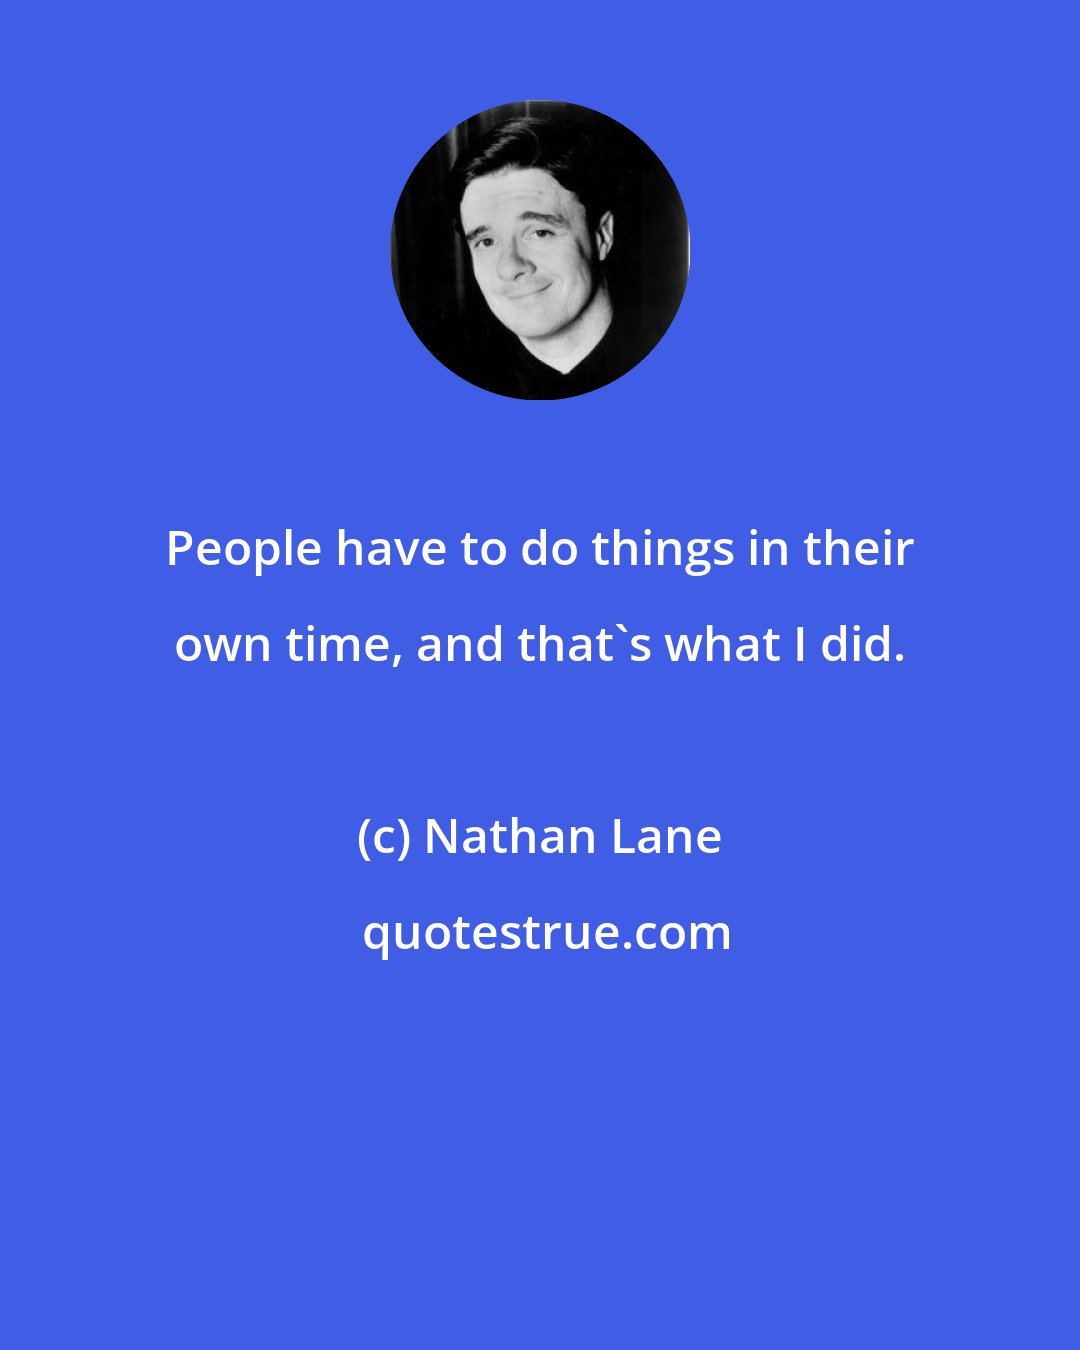 Nathan Lane: People have to do things in their own time, and that's what I did.